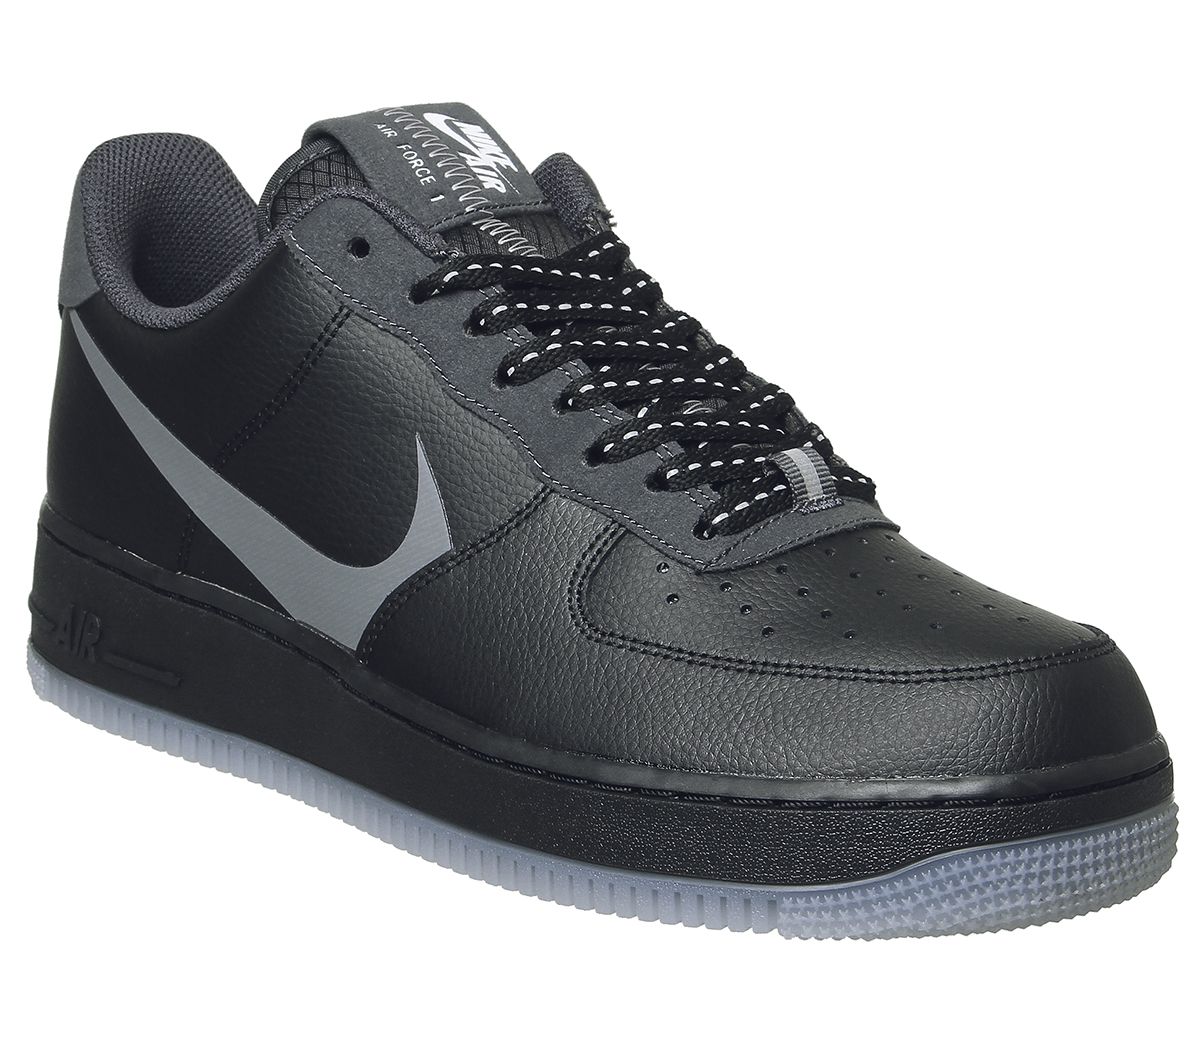 Nike Air Force 1 07 Trainers Black Silver Lilac Anthracite - His trainers